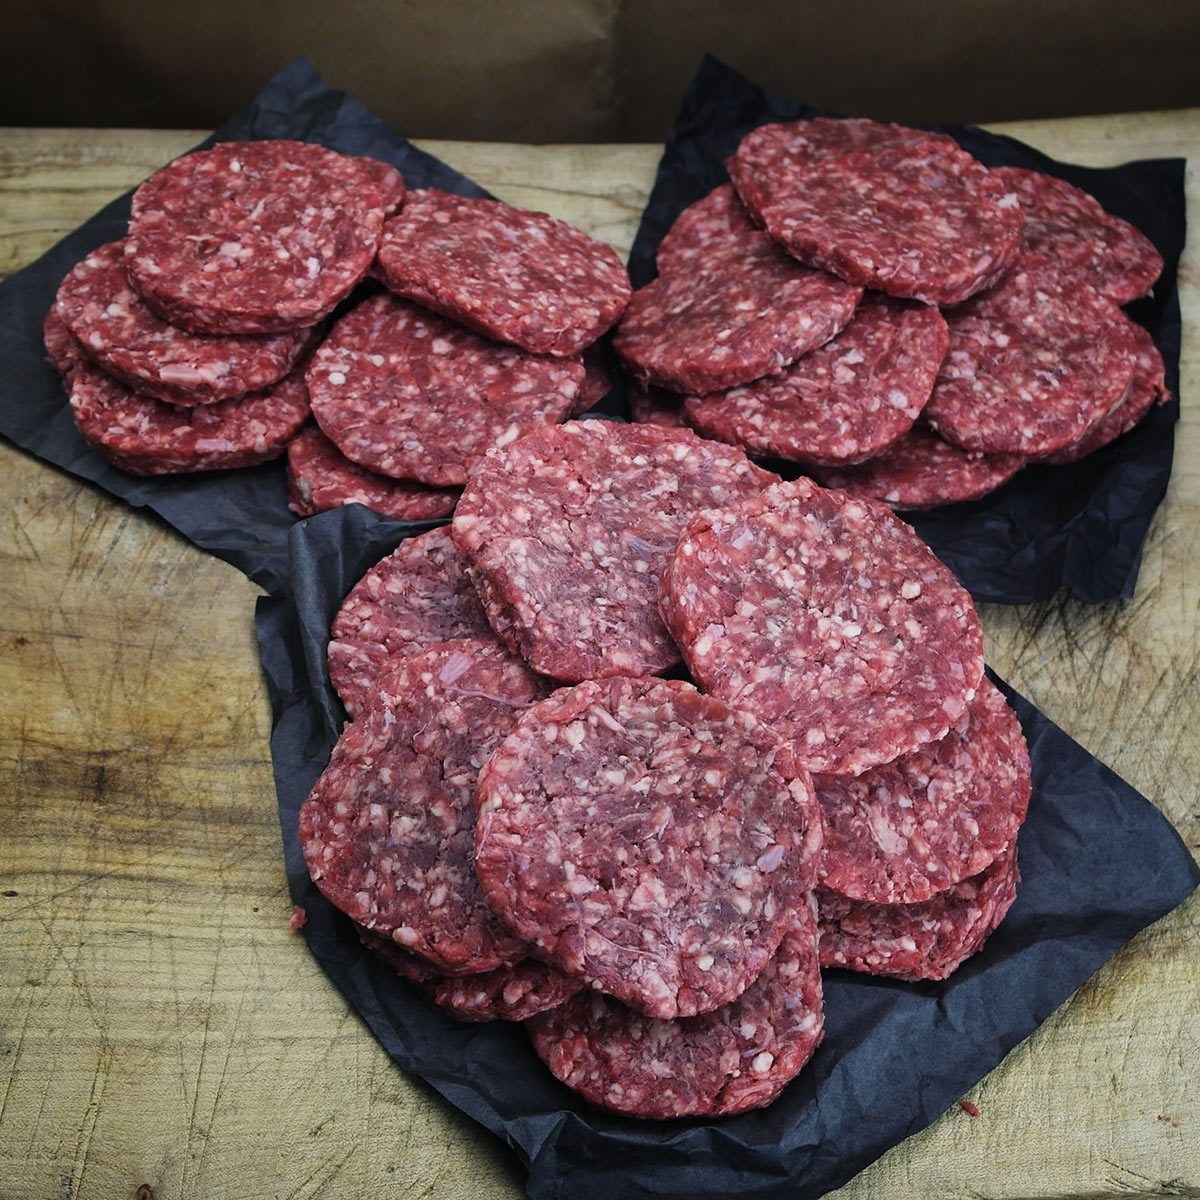 Taste Tradition Wagyu Beef Burgers, 24 x 170g (6oz) presented on table